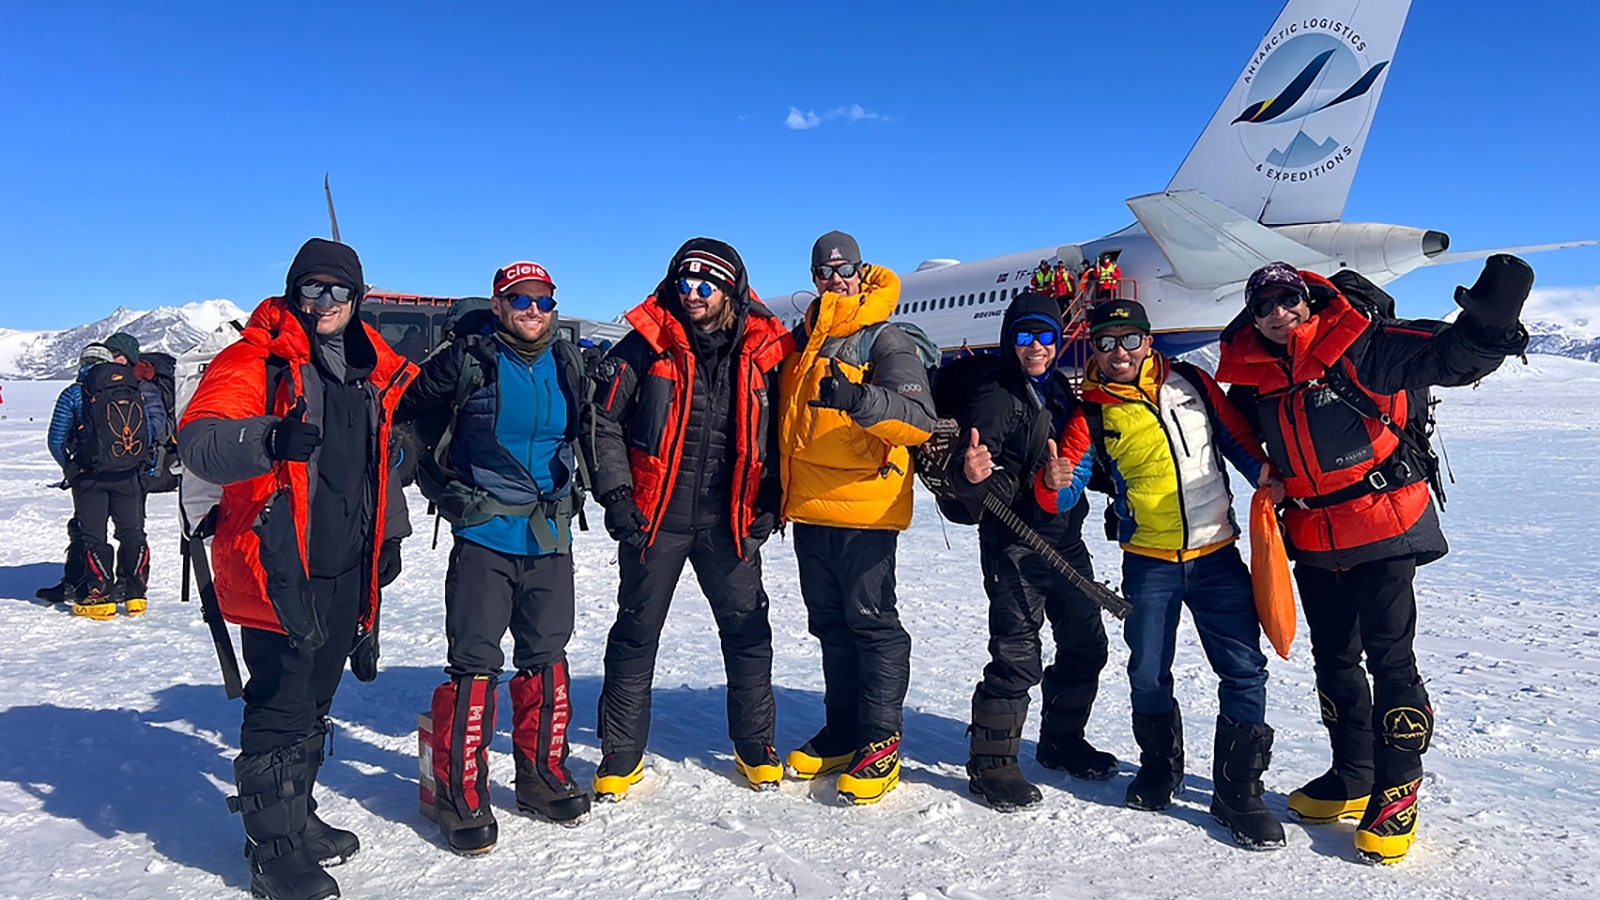 Dr. Joe McGinley, left, and the rest of the Crazy Horse climbing team upon arrival in Antarctica.